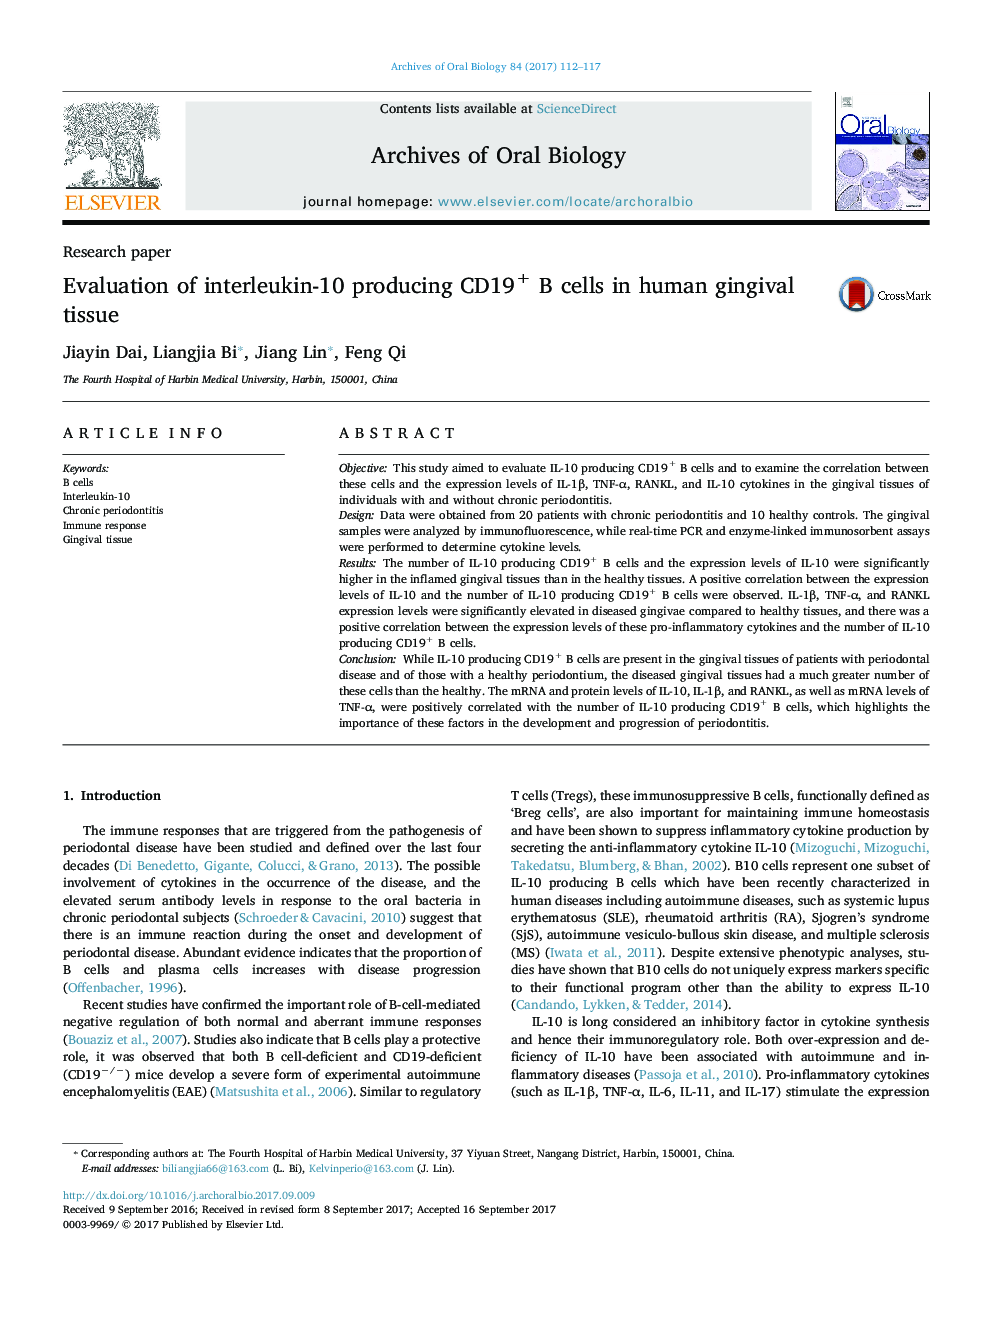 Evaluation of interleukin-10 producing CD19+ B cells in human gingival tissue